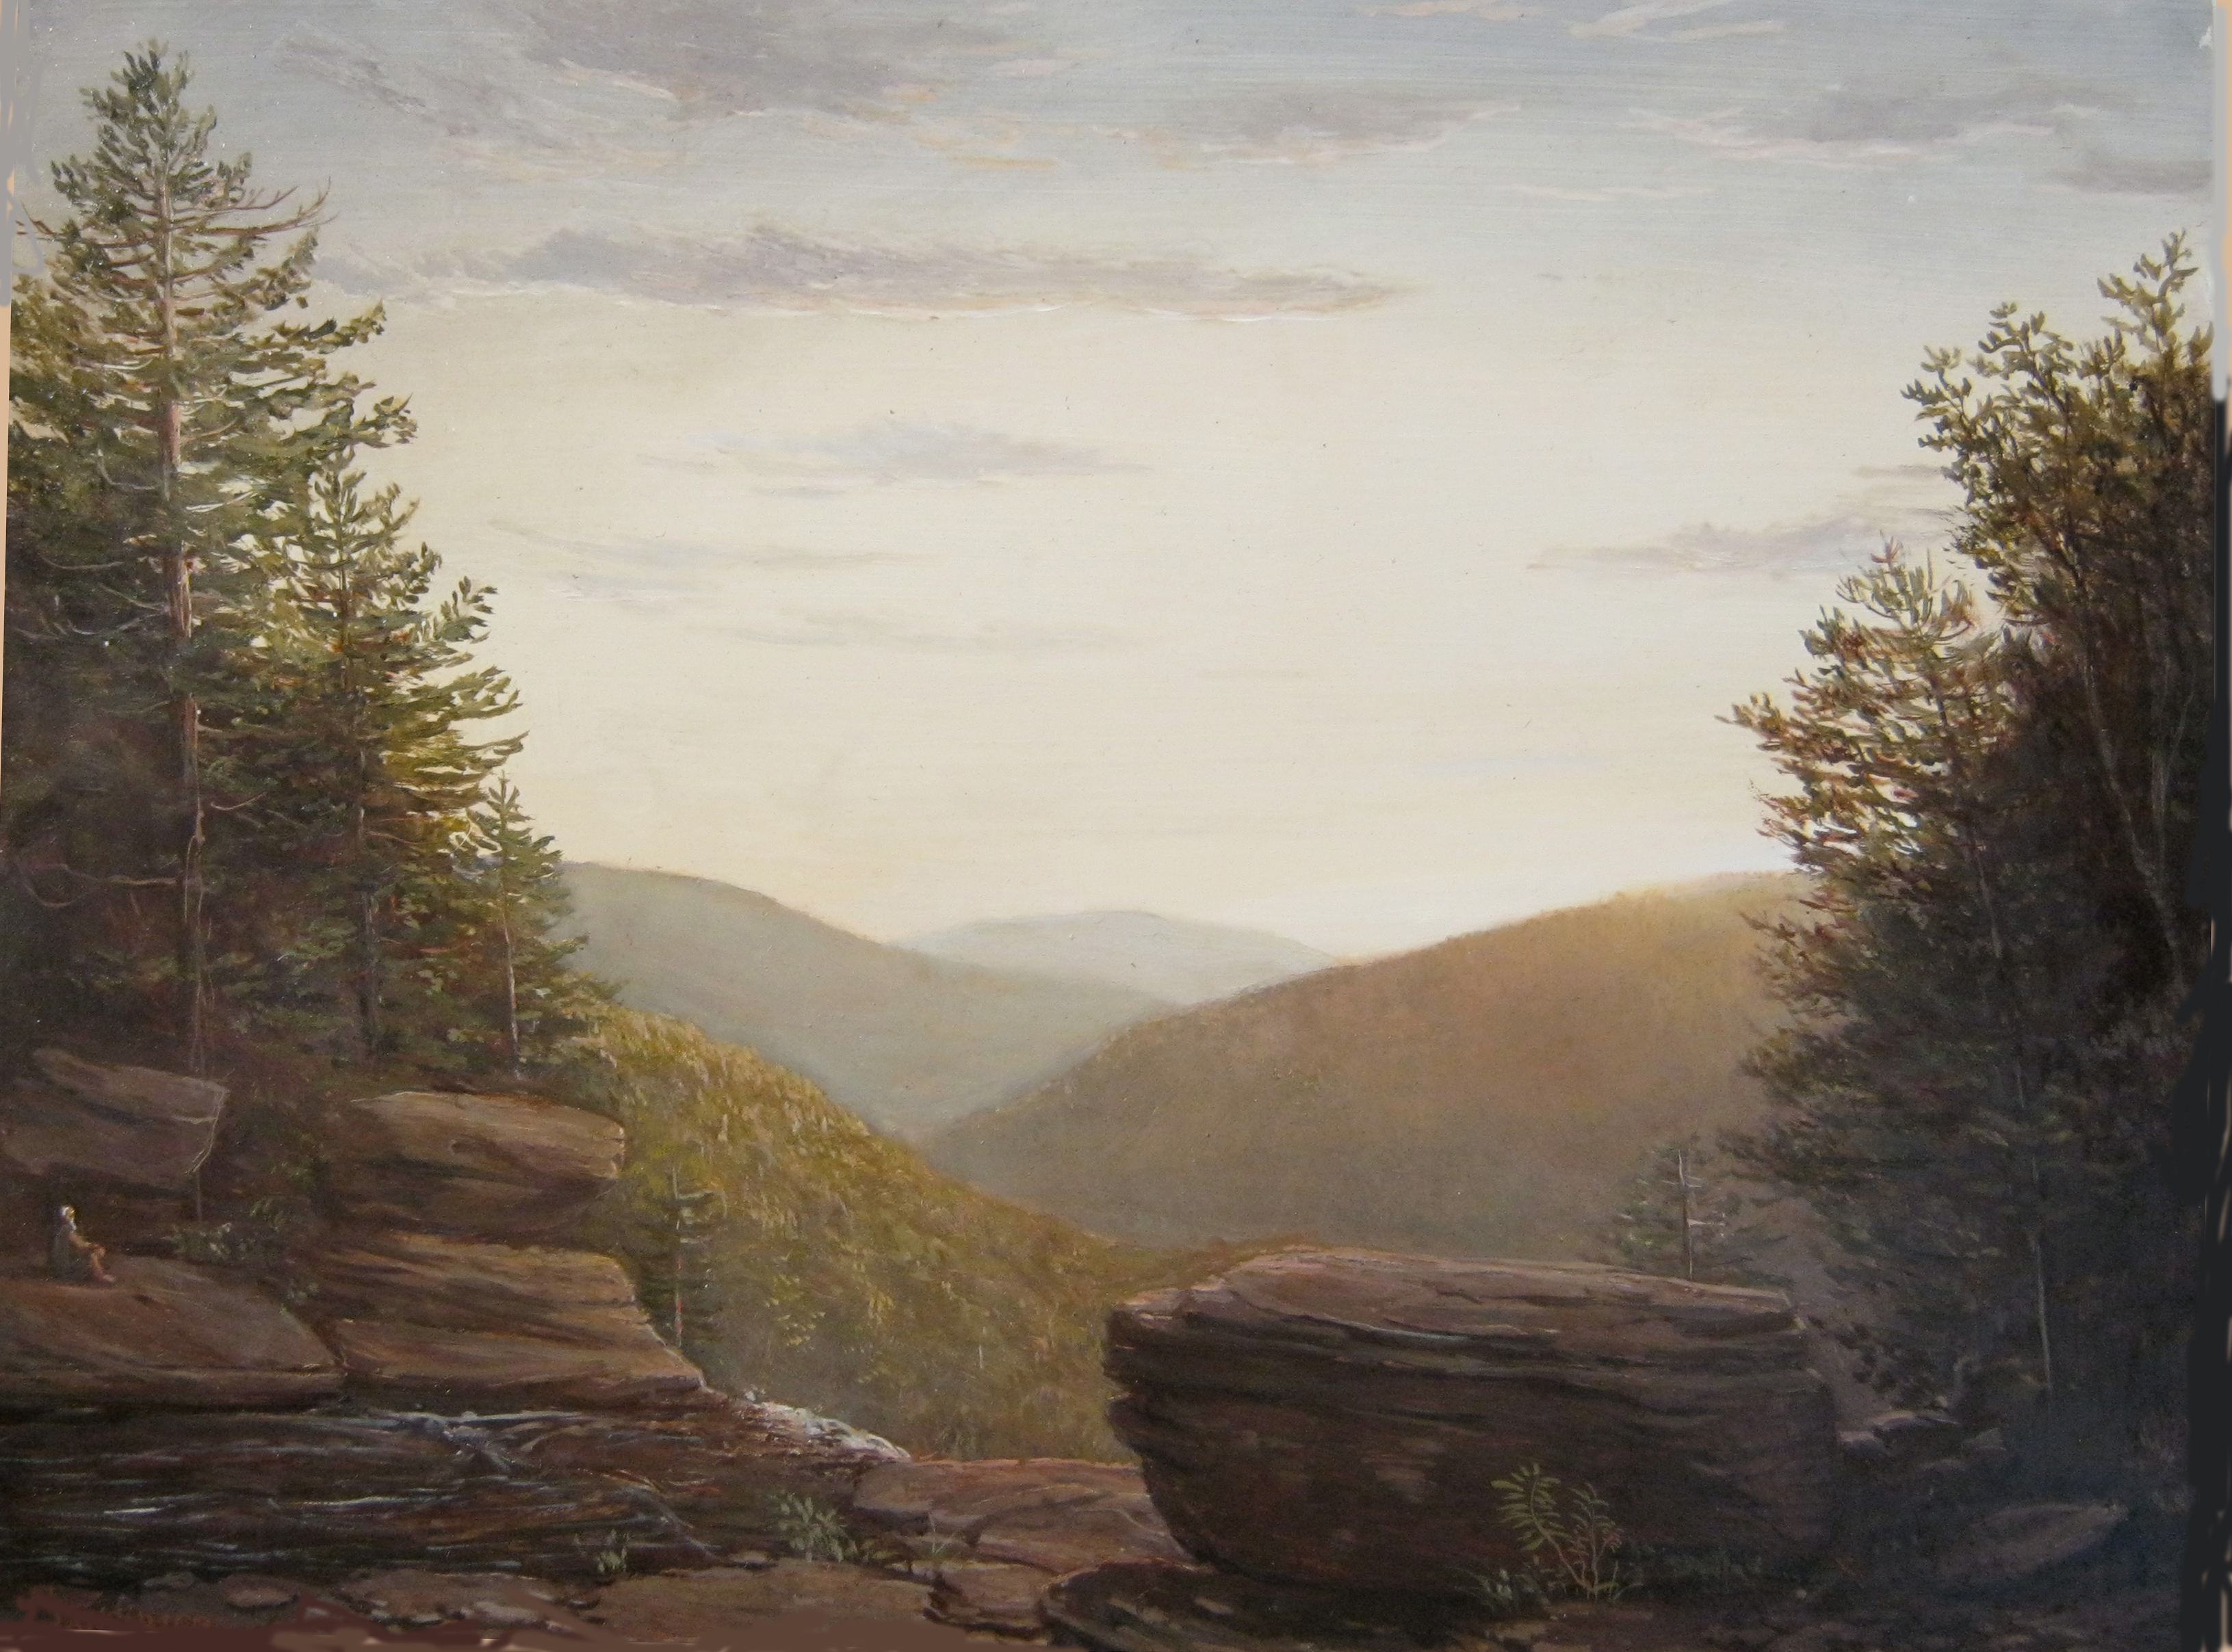 Painting The Top of Kaaterskill Falls